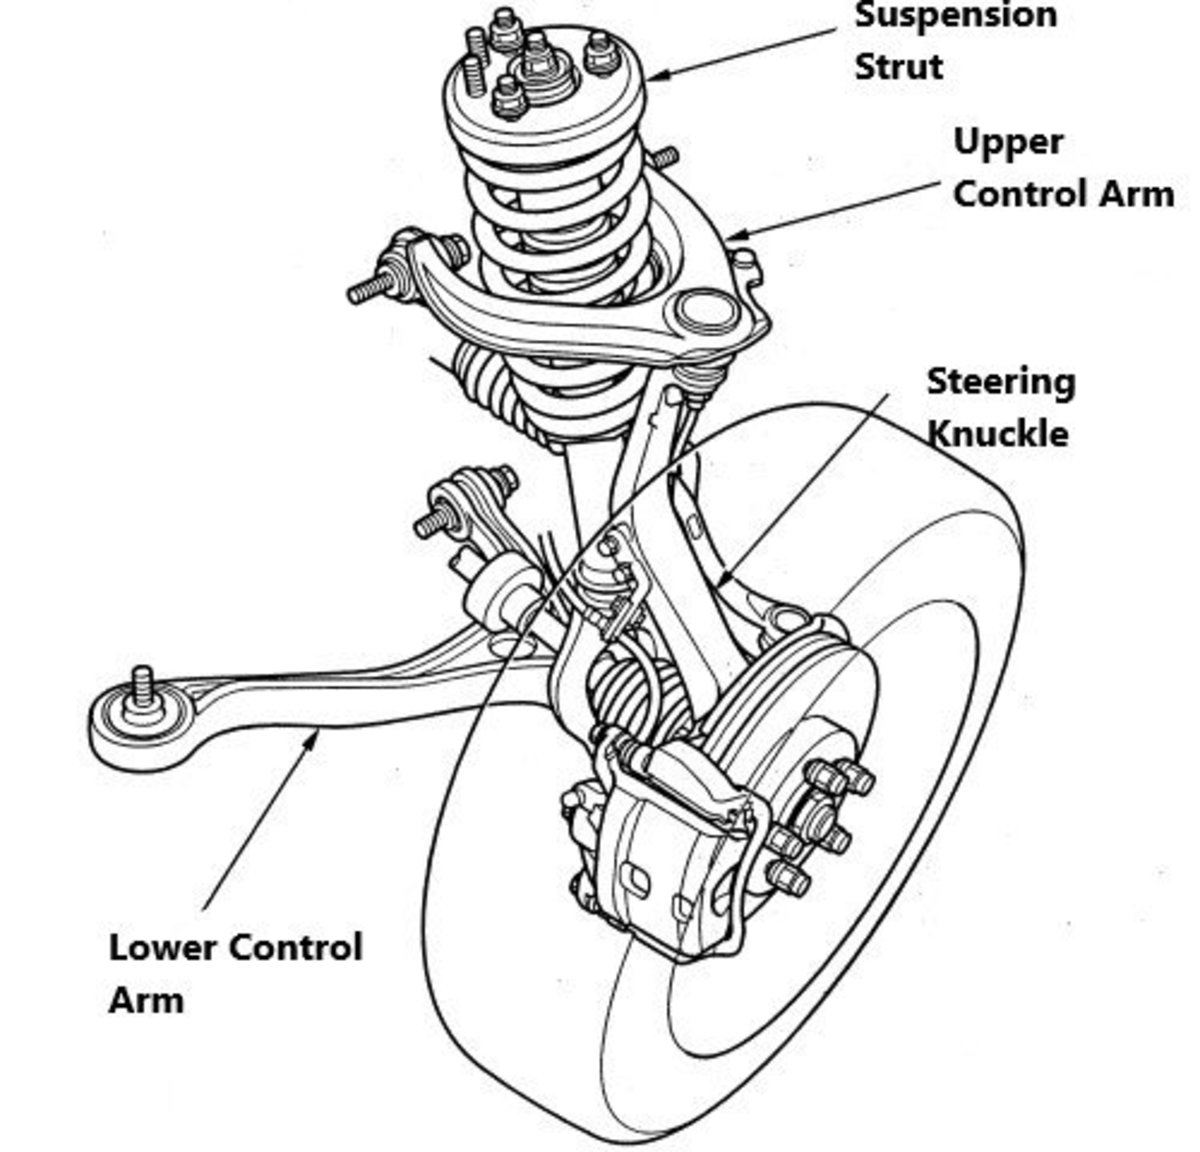 Replacing the Front Suspension on a 2008–2012 Honda Accord (3.5L V6) (With Video)